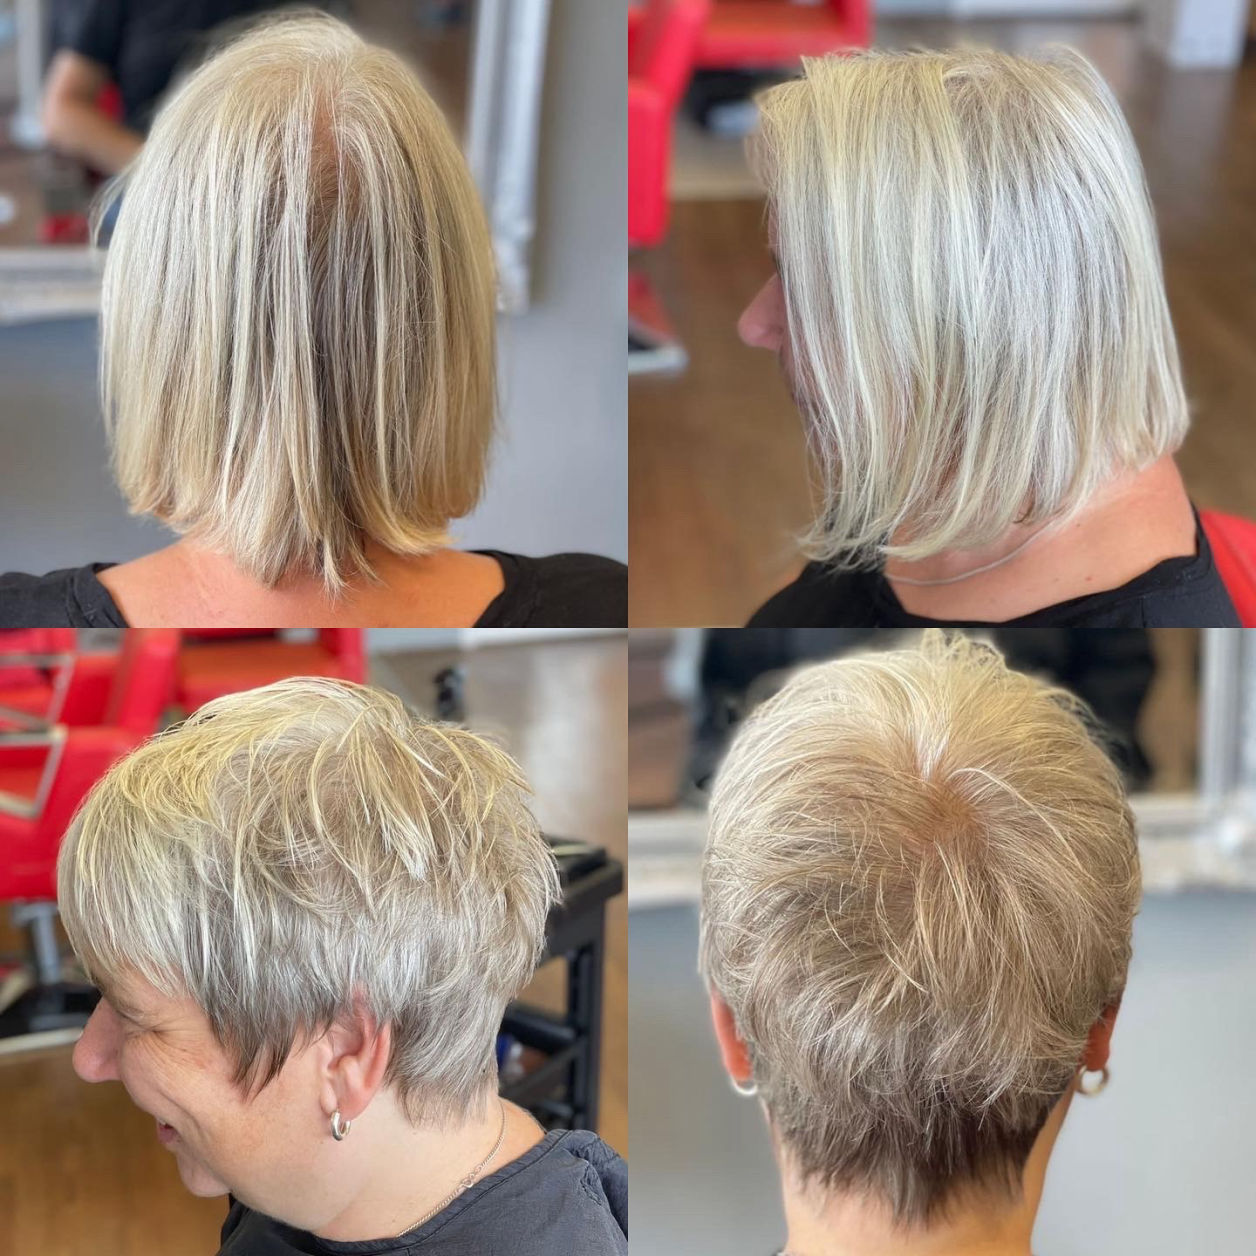 Complete restyle short cropped styles